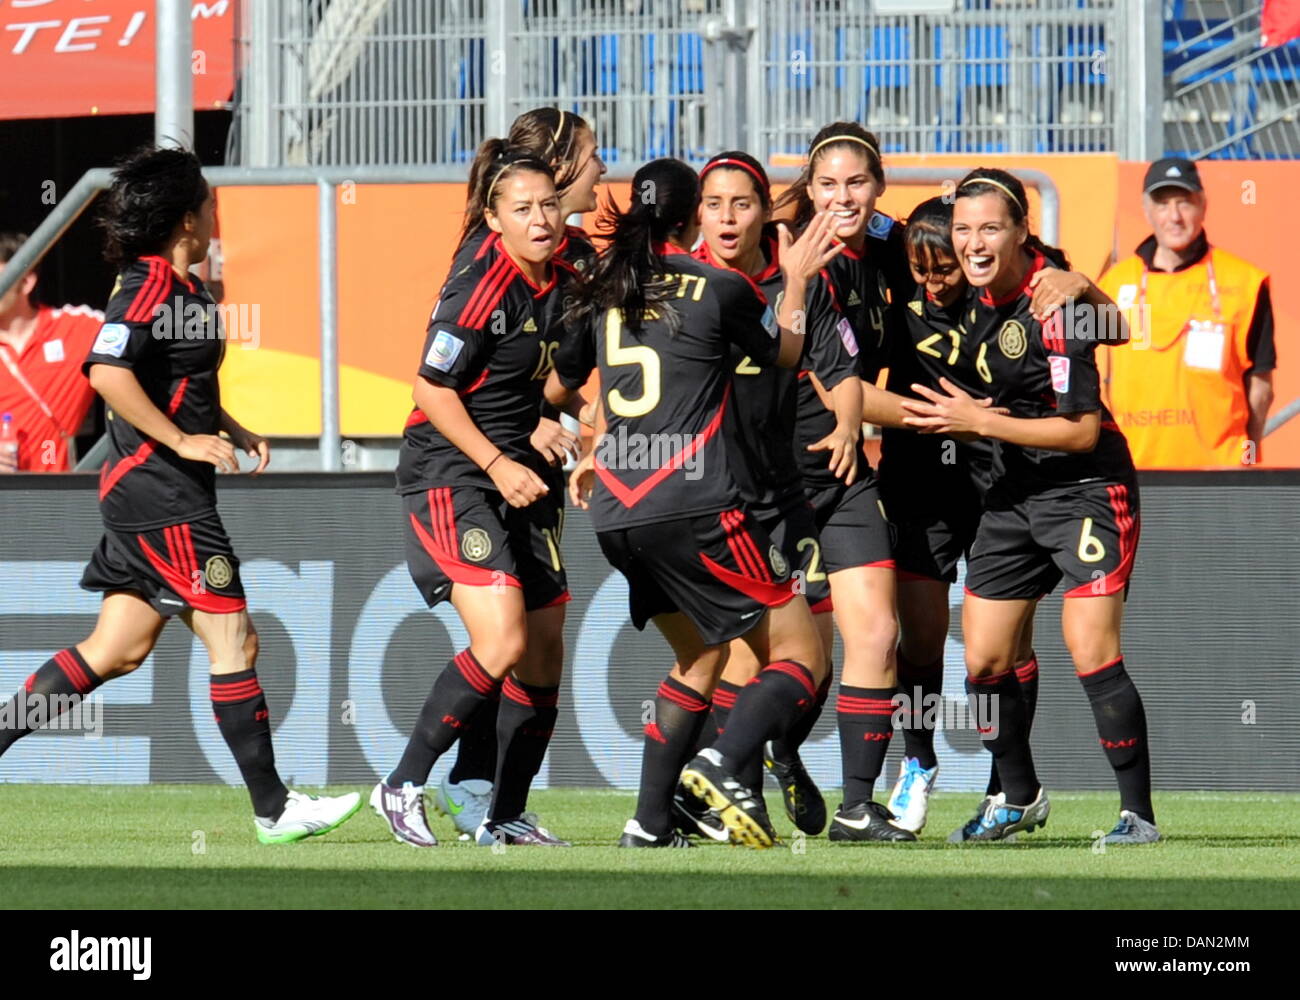 Stephany Mayor of Mexico (2-R) celebrates her 0-1 goal with team-mates during the Group B match New Zealand against Mexico of FIFA Women's World Cup soccer tournament at the Rhein Neckar Arena in Sinsheim, Germany, 05 July 2011. Foto: Bernd Weissbrod dpa/lsw/lrs  +++(c) dpa - Bildfunk+++ Stock Photo